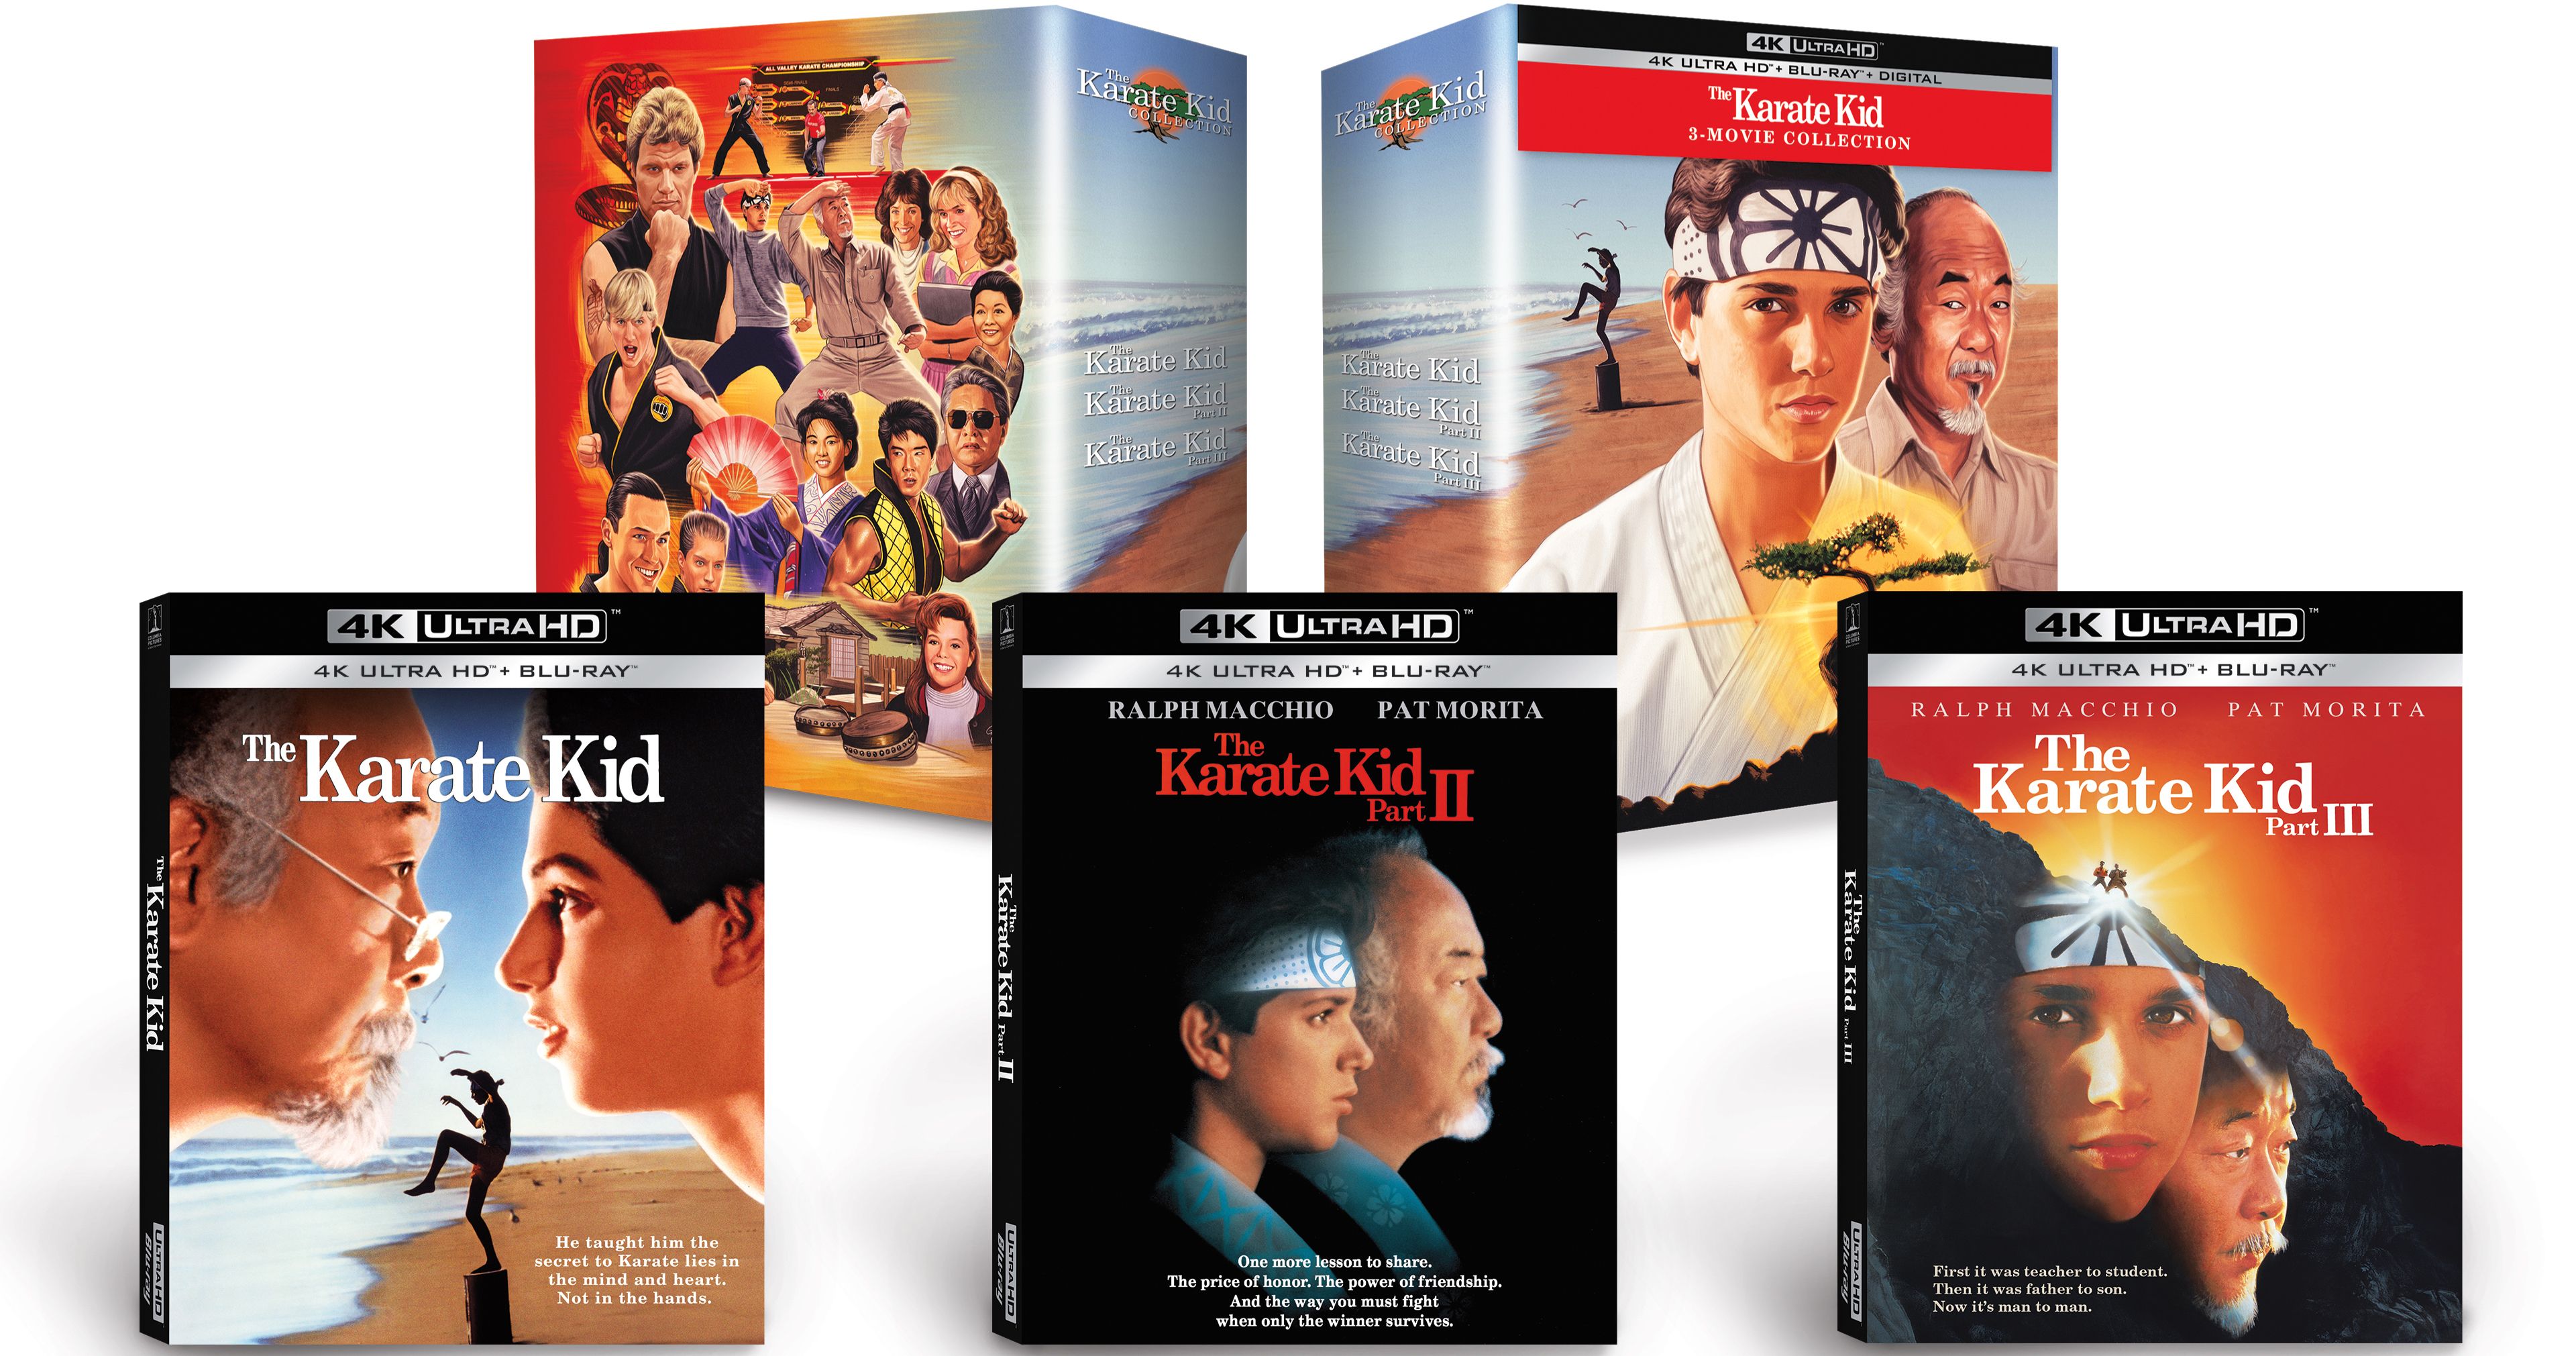 The Karate Kid Collection Brings the Original Trilogy Home for the Holidays in 4K Ultra HD